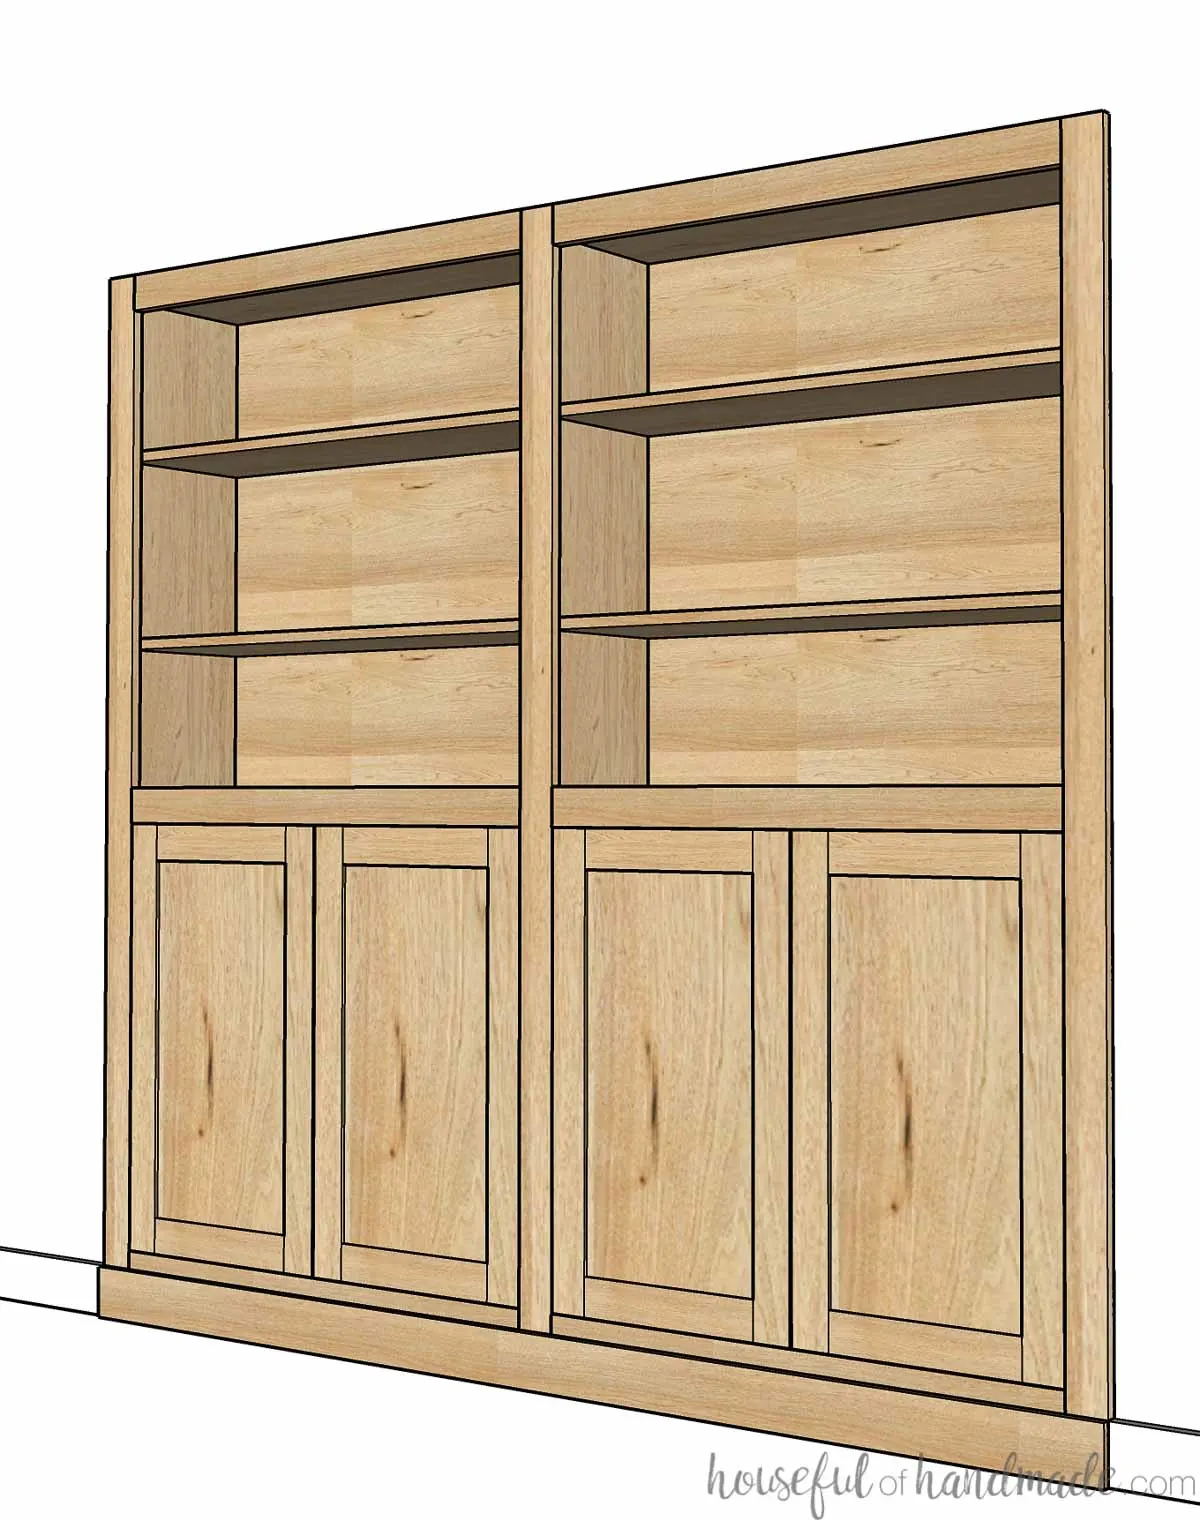 3D drawing of built in bookcase plans of 2 bookshelves with doors on the lower sections recessed into the wall. 